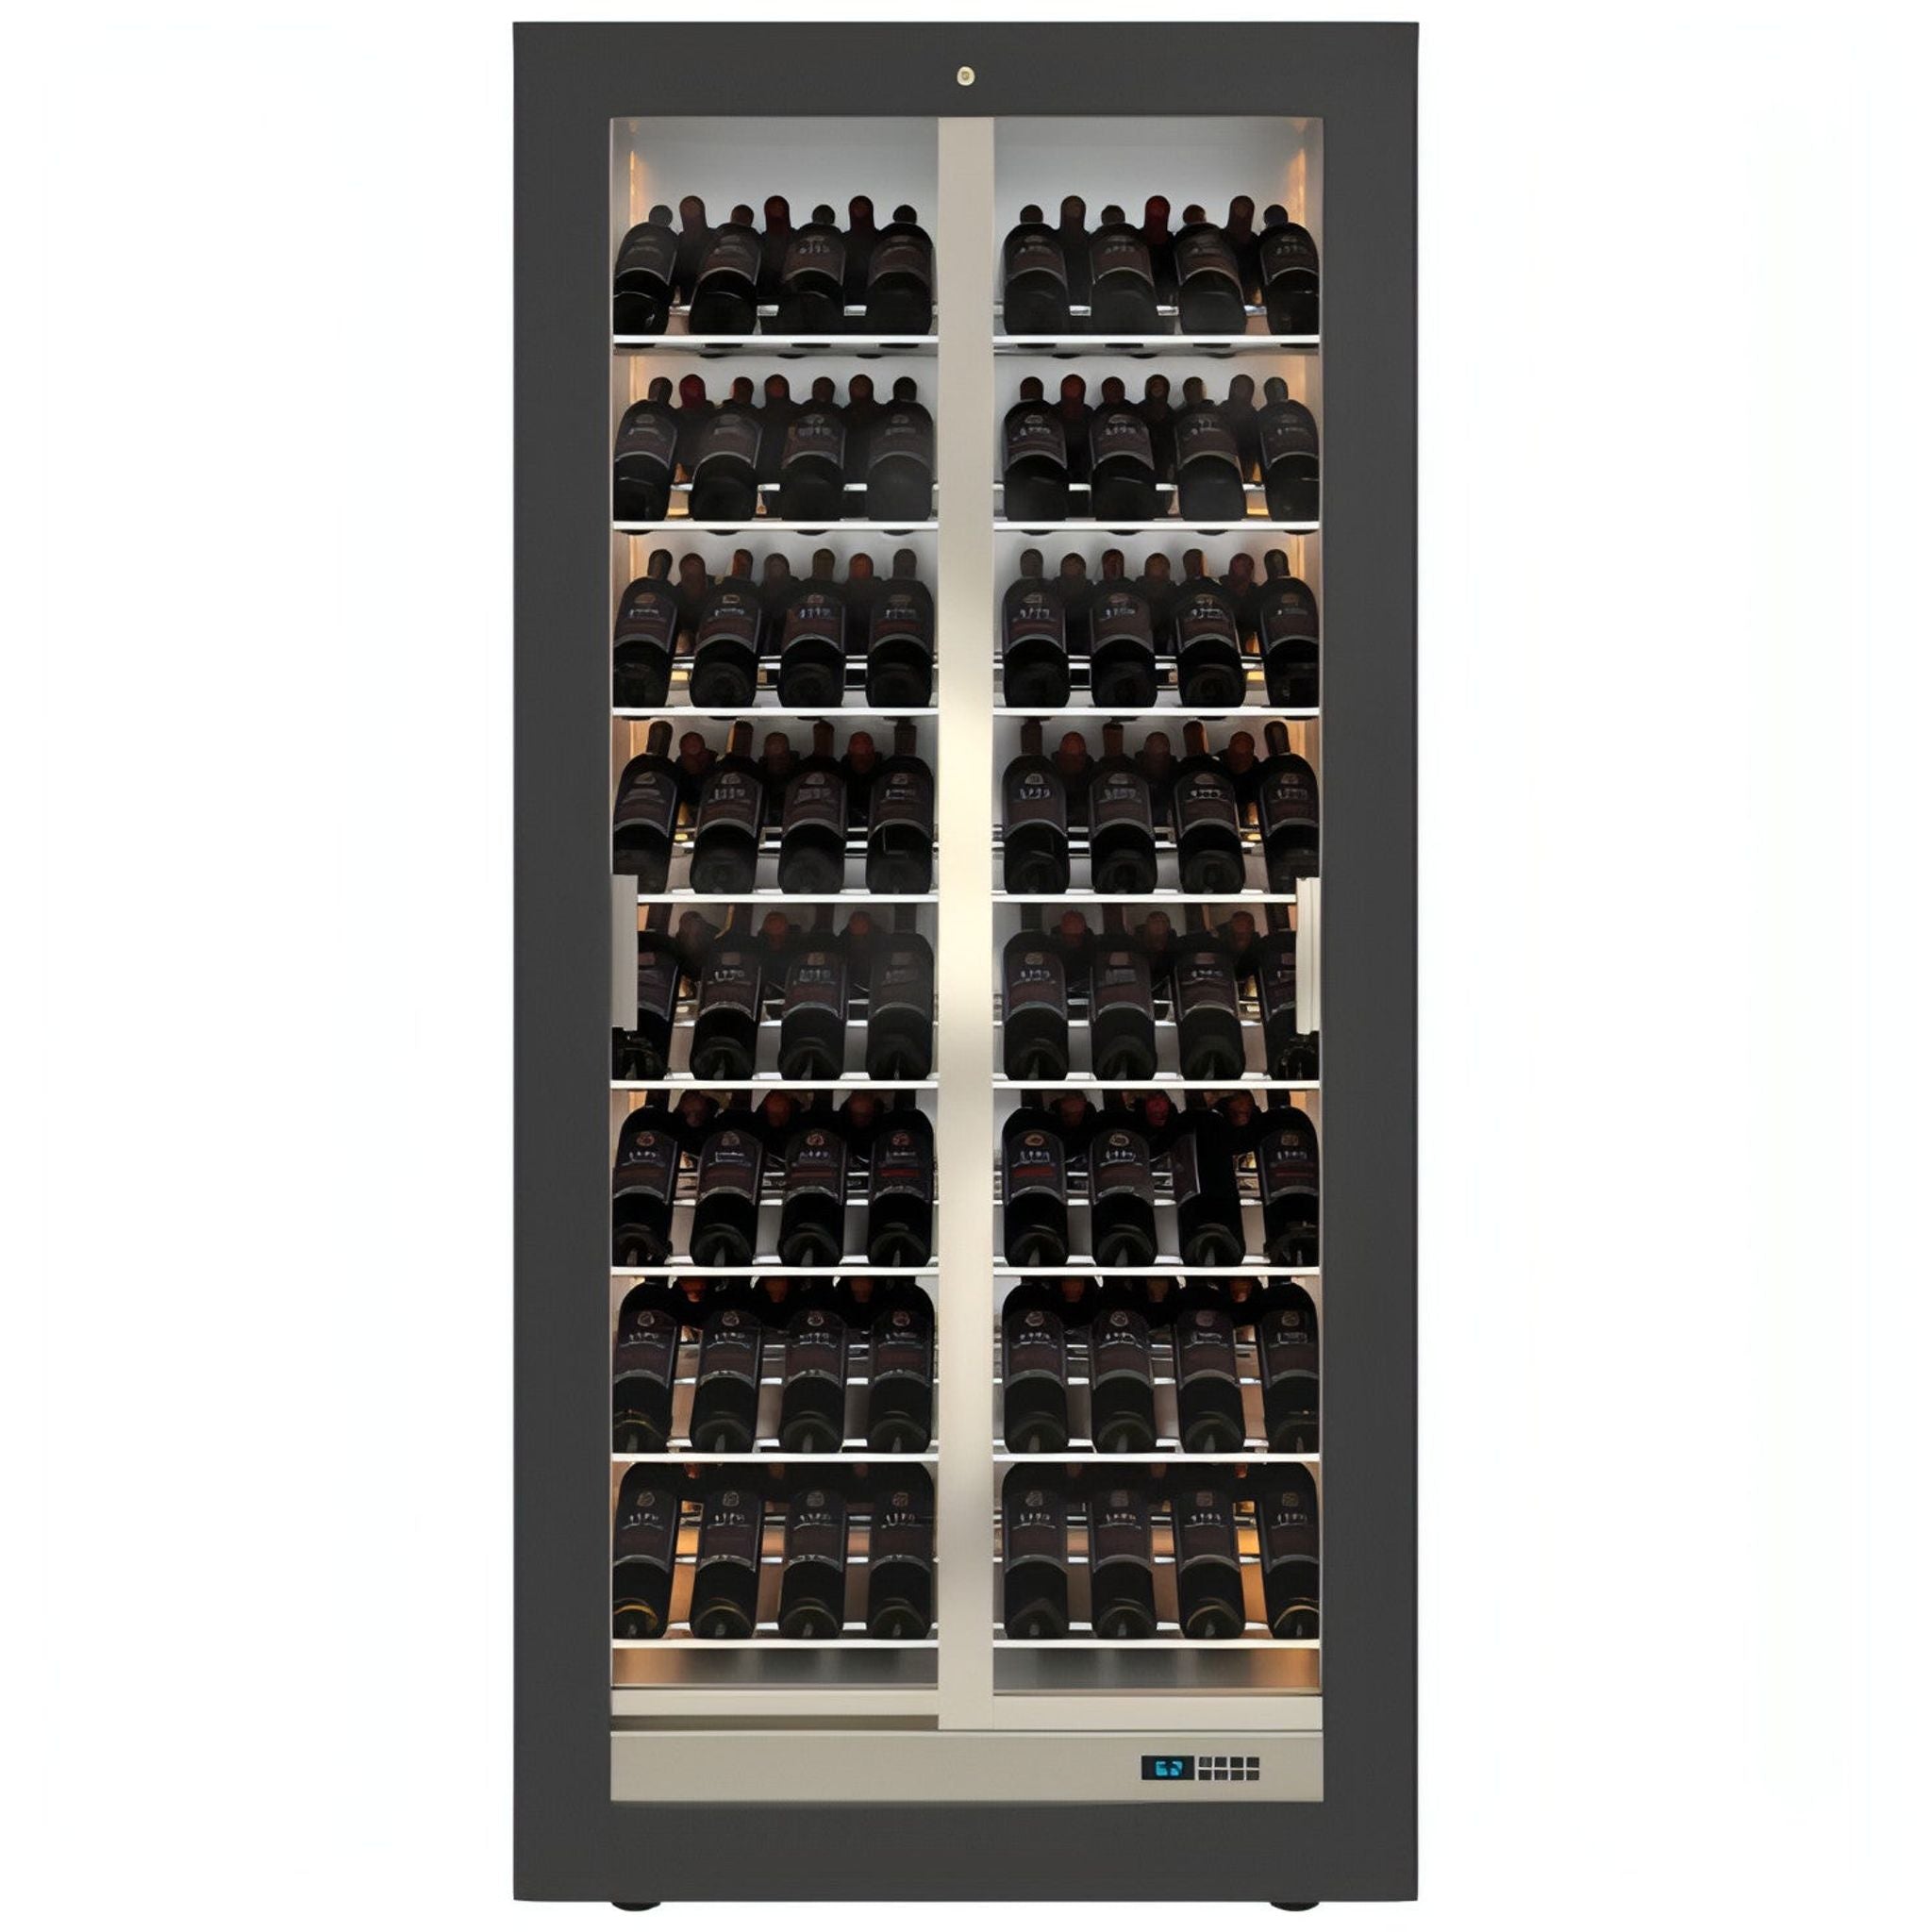 Teca B - Built in Wine Wall TE-B12 - Tilted Shelving - For Home Use